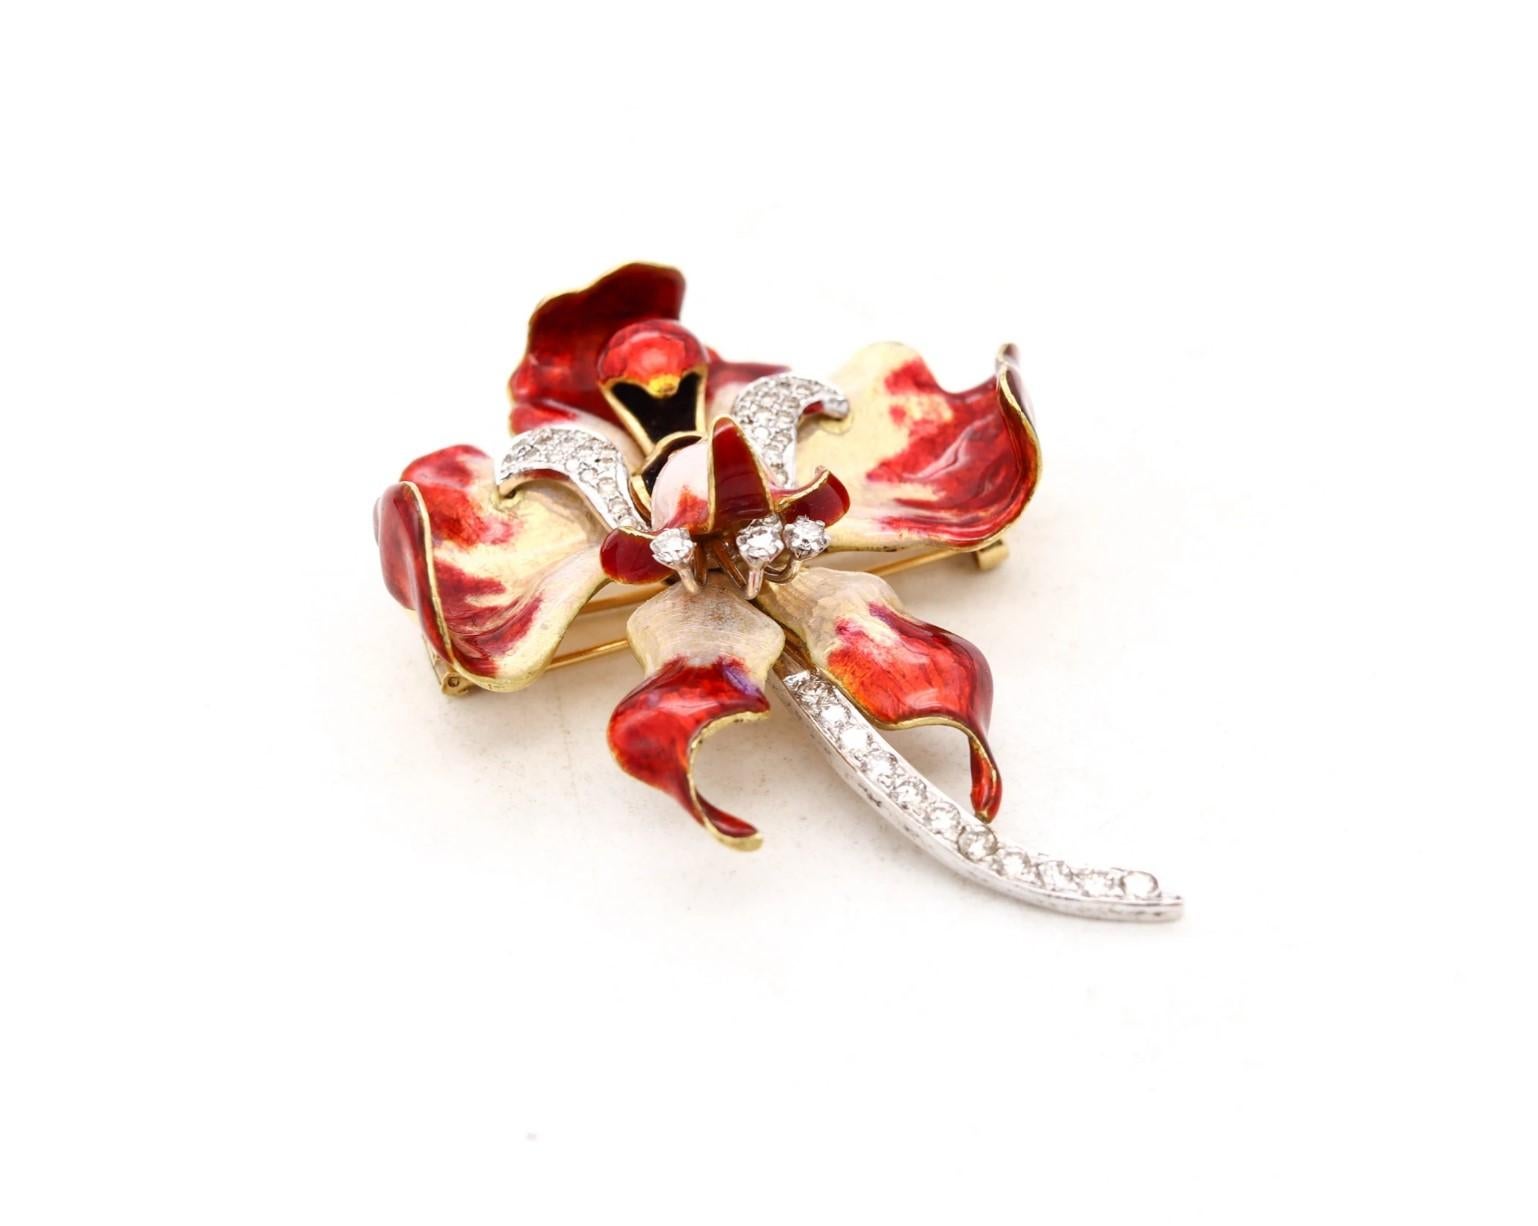 Enameled Art Nouveau Red orchid brooch attributed to Tiffany & Co.

Fabulous and gorgeous piece created in Europe probably France, during the Art-Nouveau period, circa 1880-1900. It was carefully crafted, with stunning details in the shape of a Red